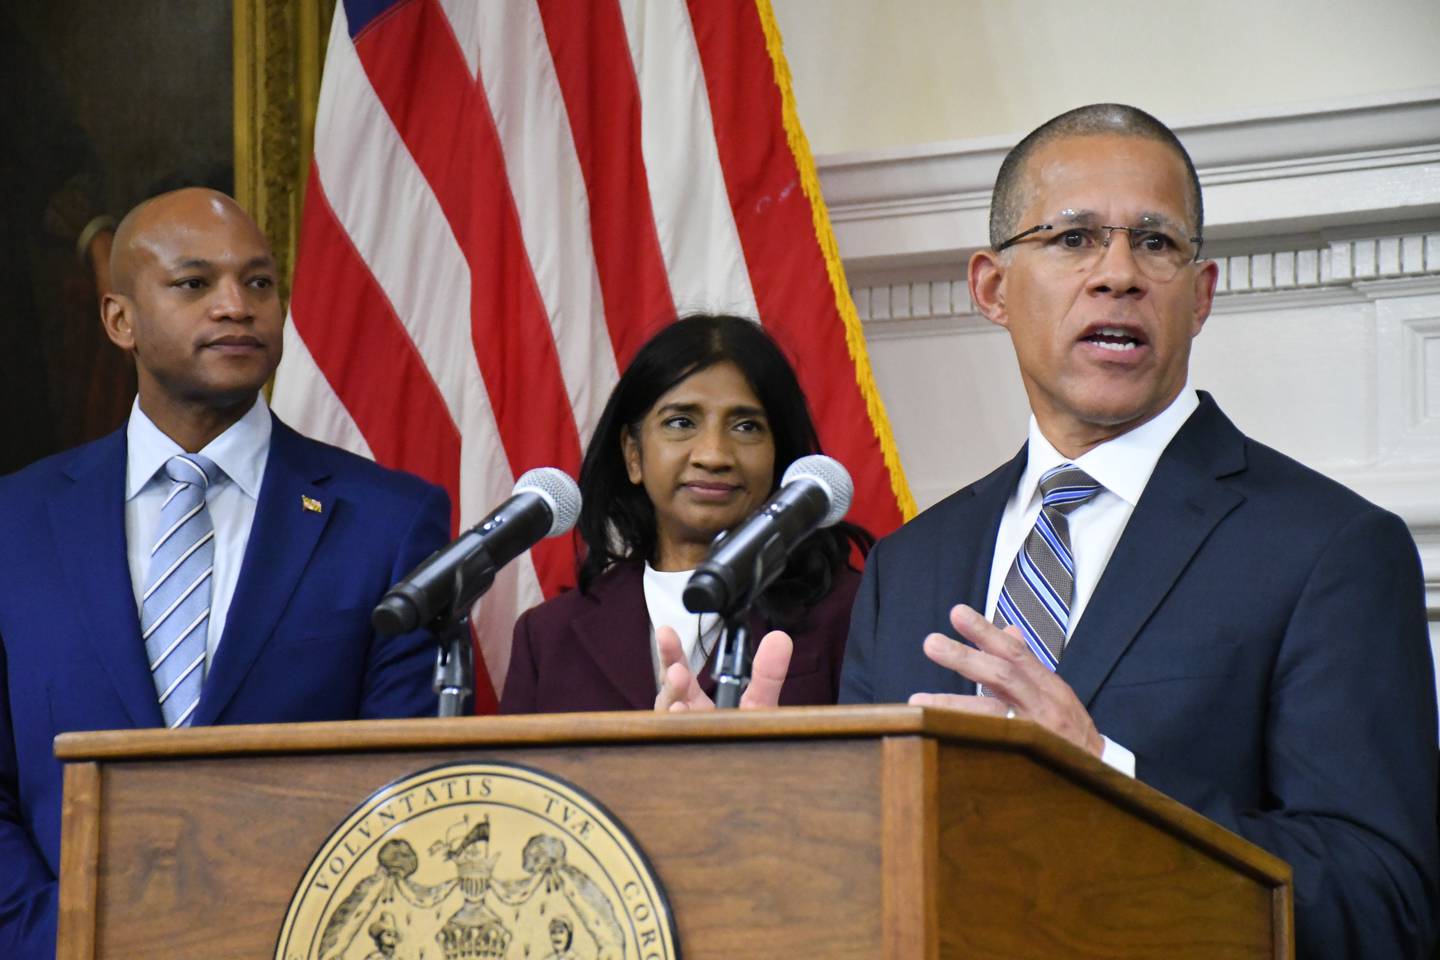 Maryland Attorney General Anthony Brown talks about violent crime during a press conference at the State House in Annapolis on Thursday, Jan. 19, 2023.